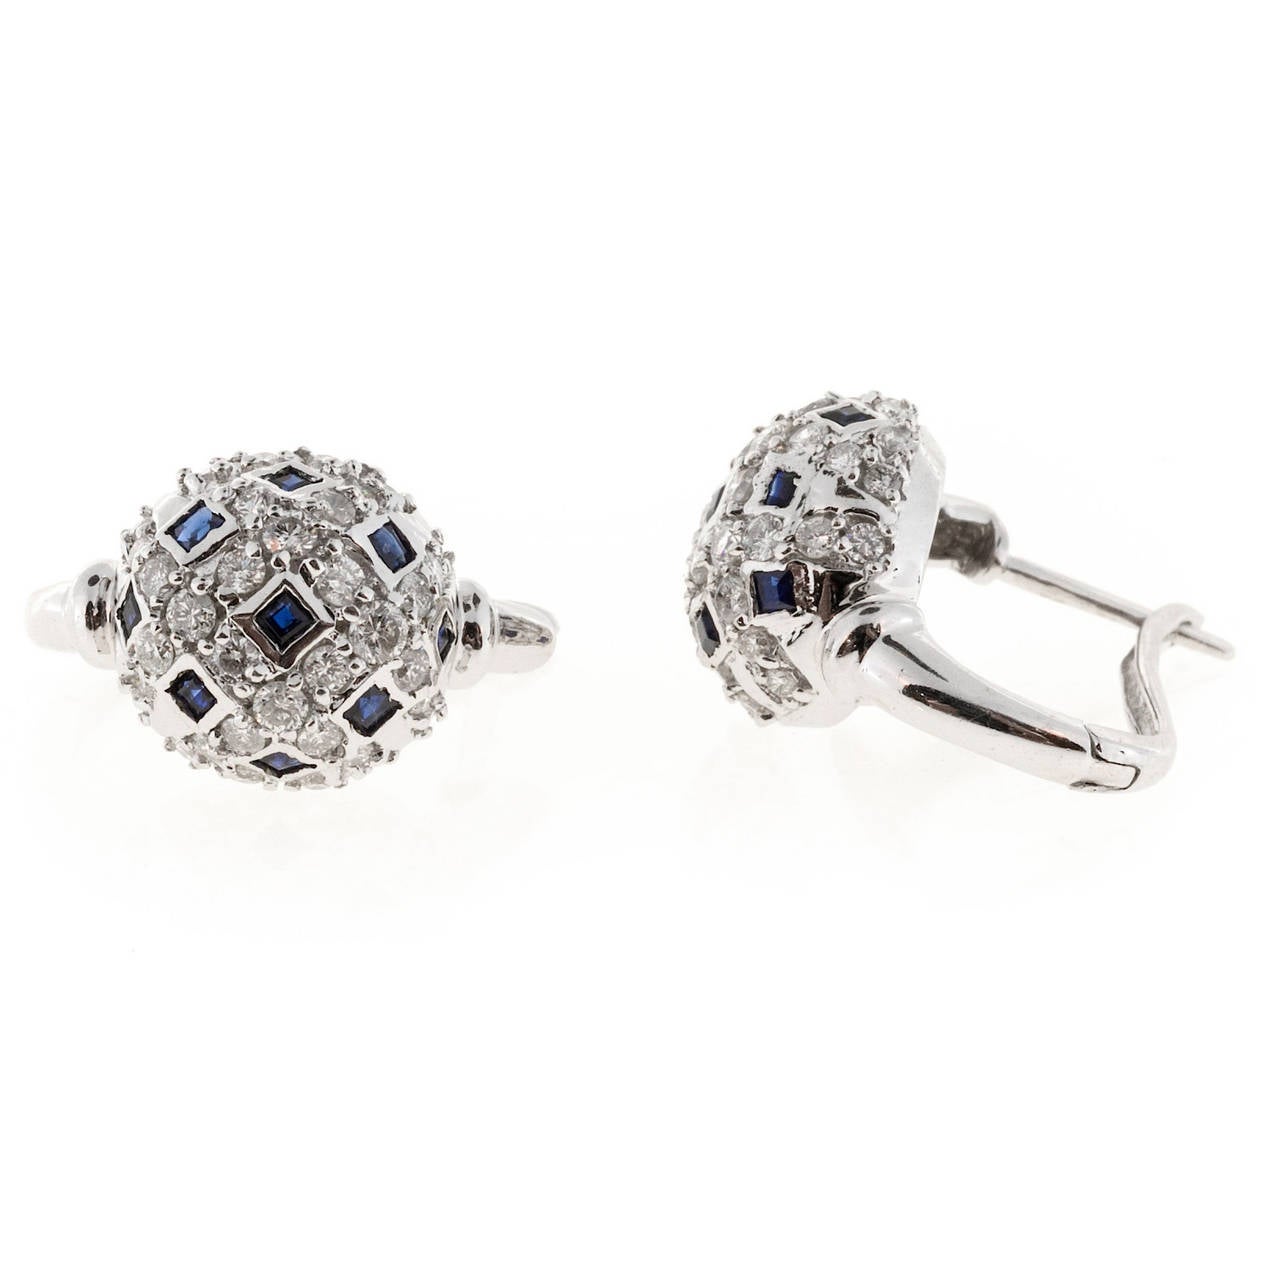 Domed 1970 round diamond square Sapphire 14k white gold earrings.

36 round diamonds, approx. total weight 1.08cts, G, VS
18 square Sapphires, approx. total weight .90cts
14k white gold
Tested: 14k
Stamped: 585
Hallmark: S with a circle